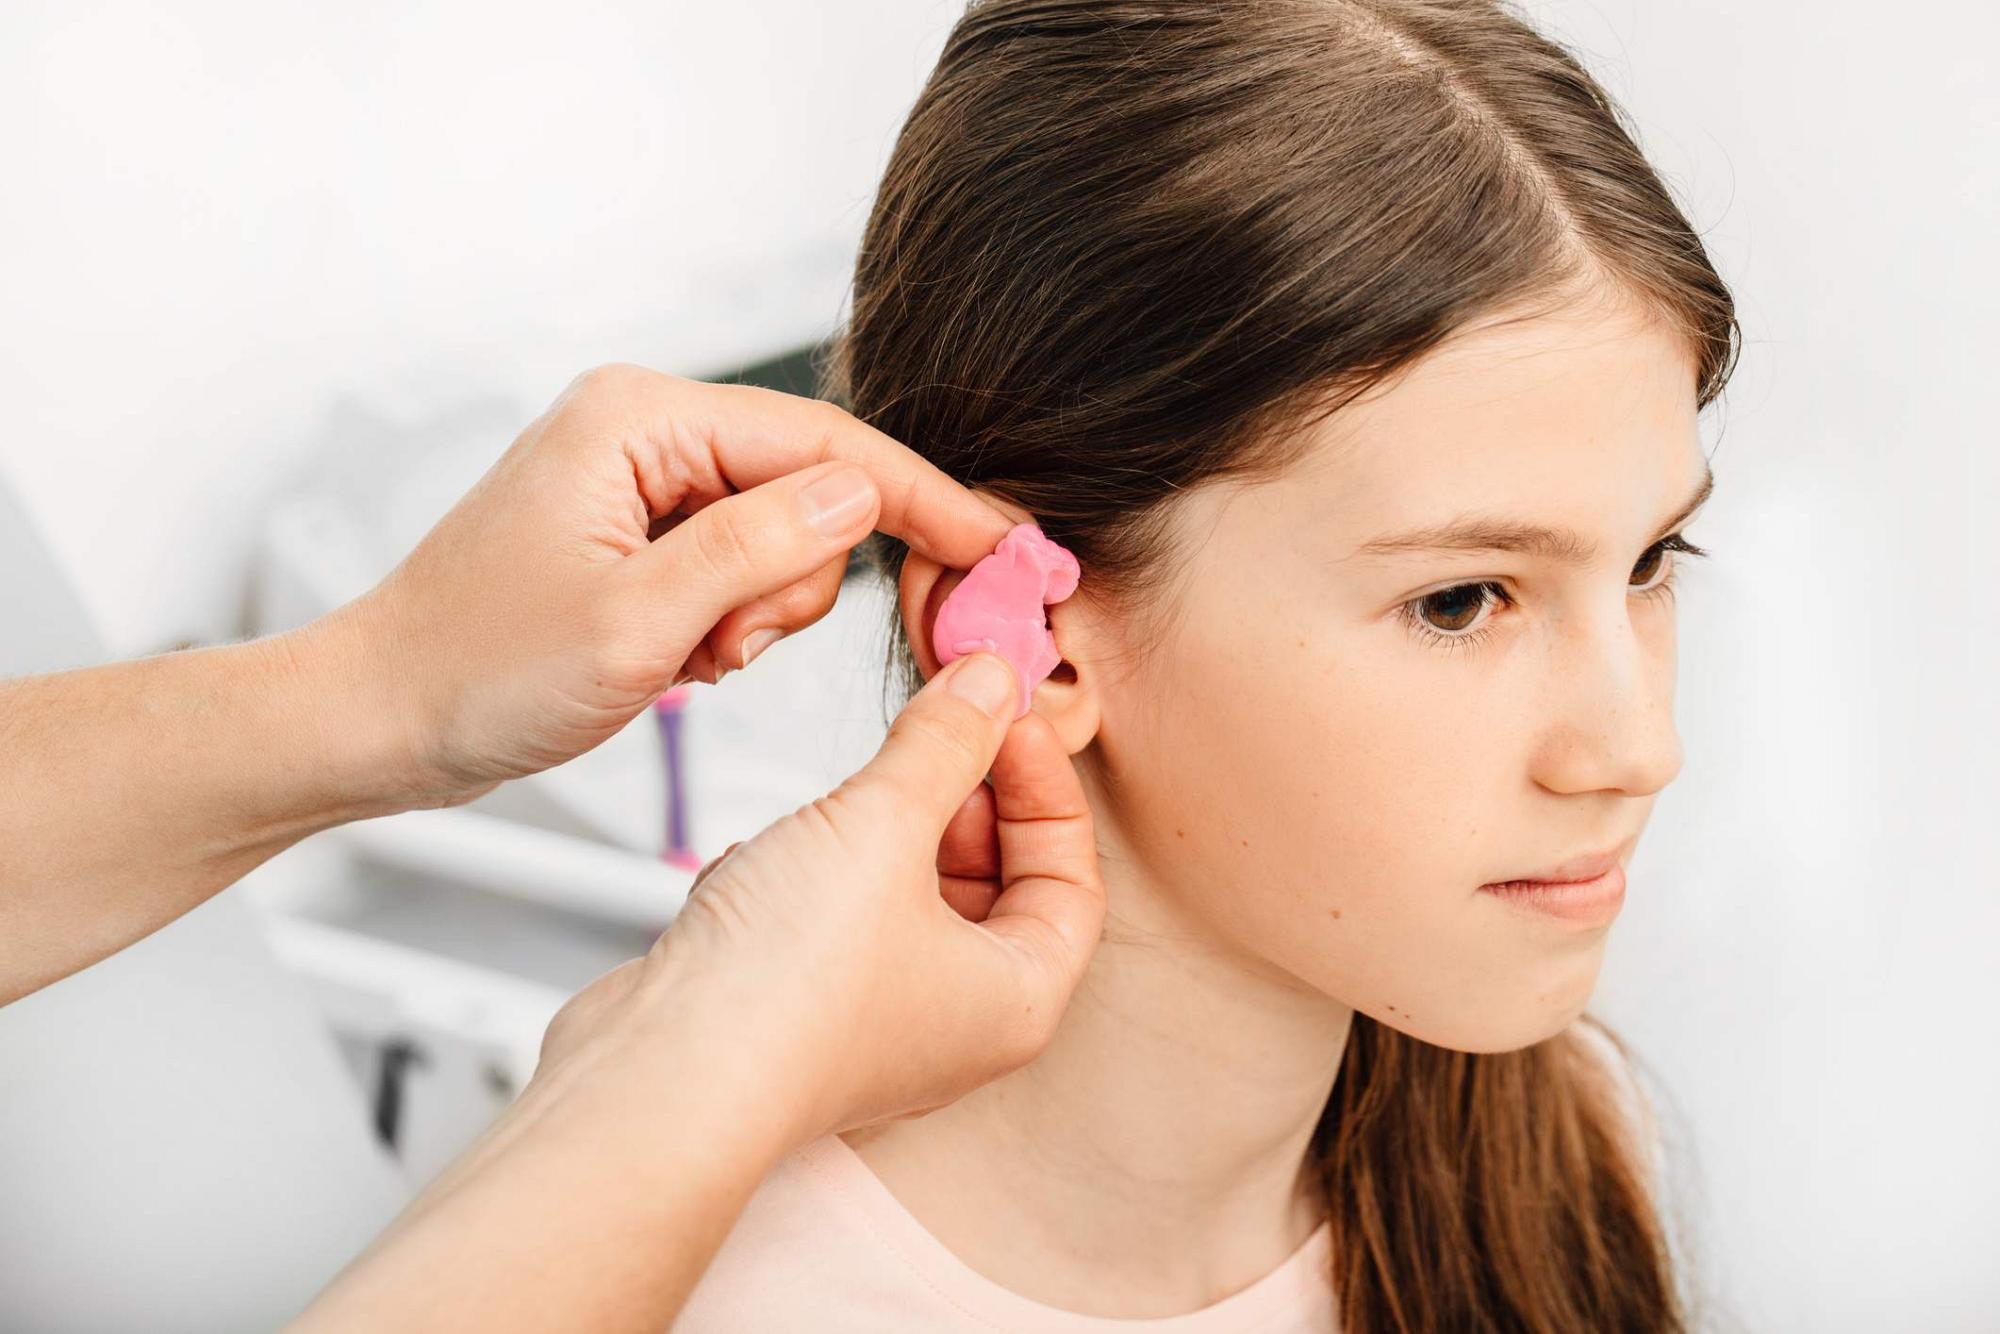 Are Expensive Custom-Molded Earplugs for Hearing Protection Worth the Cost